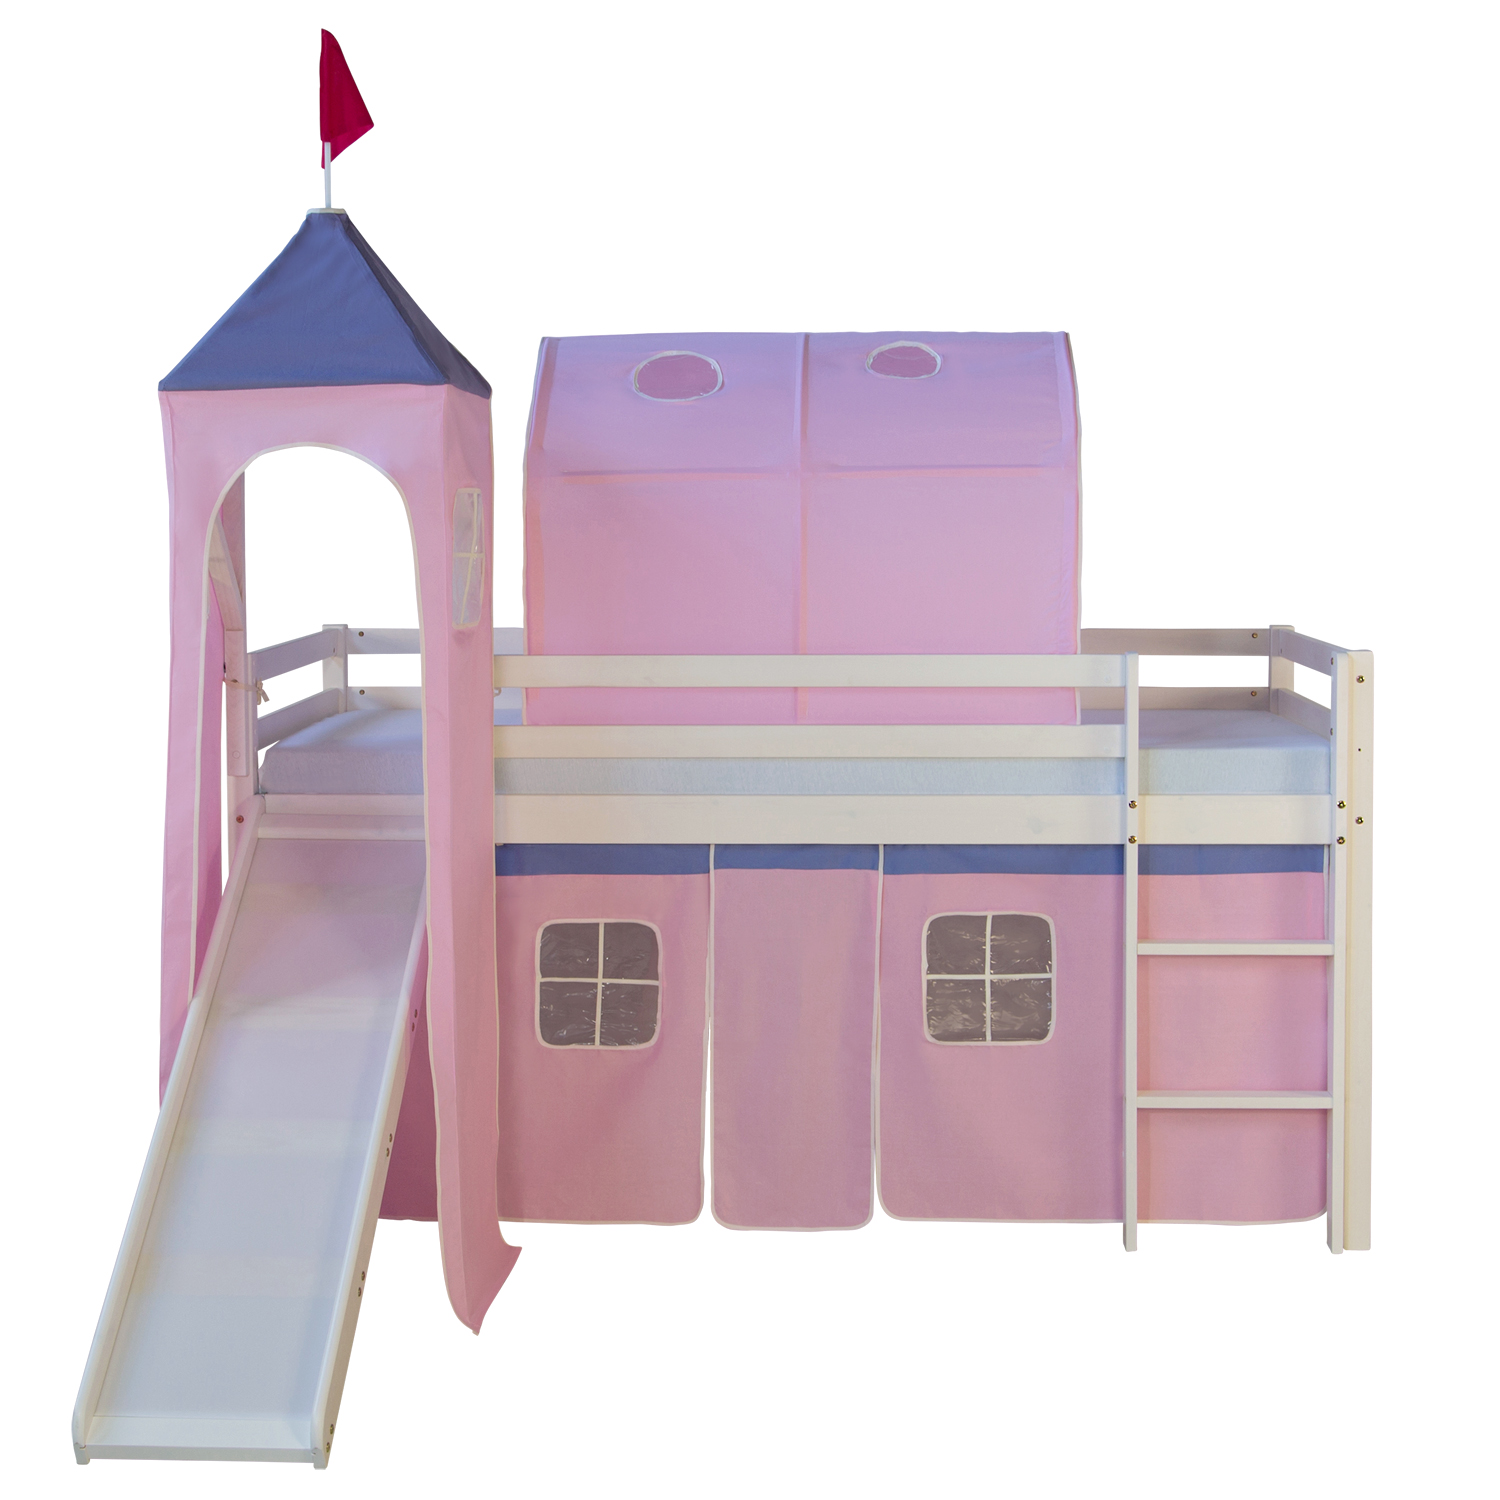 Loftbed 90x200 cm with Tower Tunnel Slide Mattress Bunk bed Childrens bed Solid Pine Wood Slats Curtain Pink